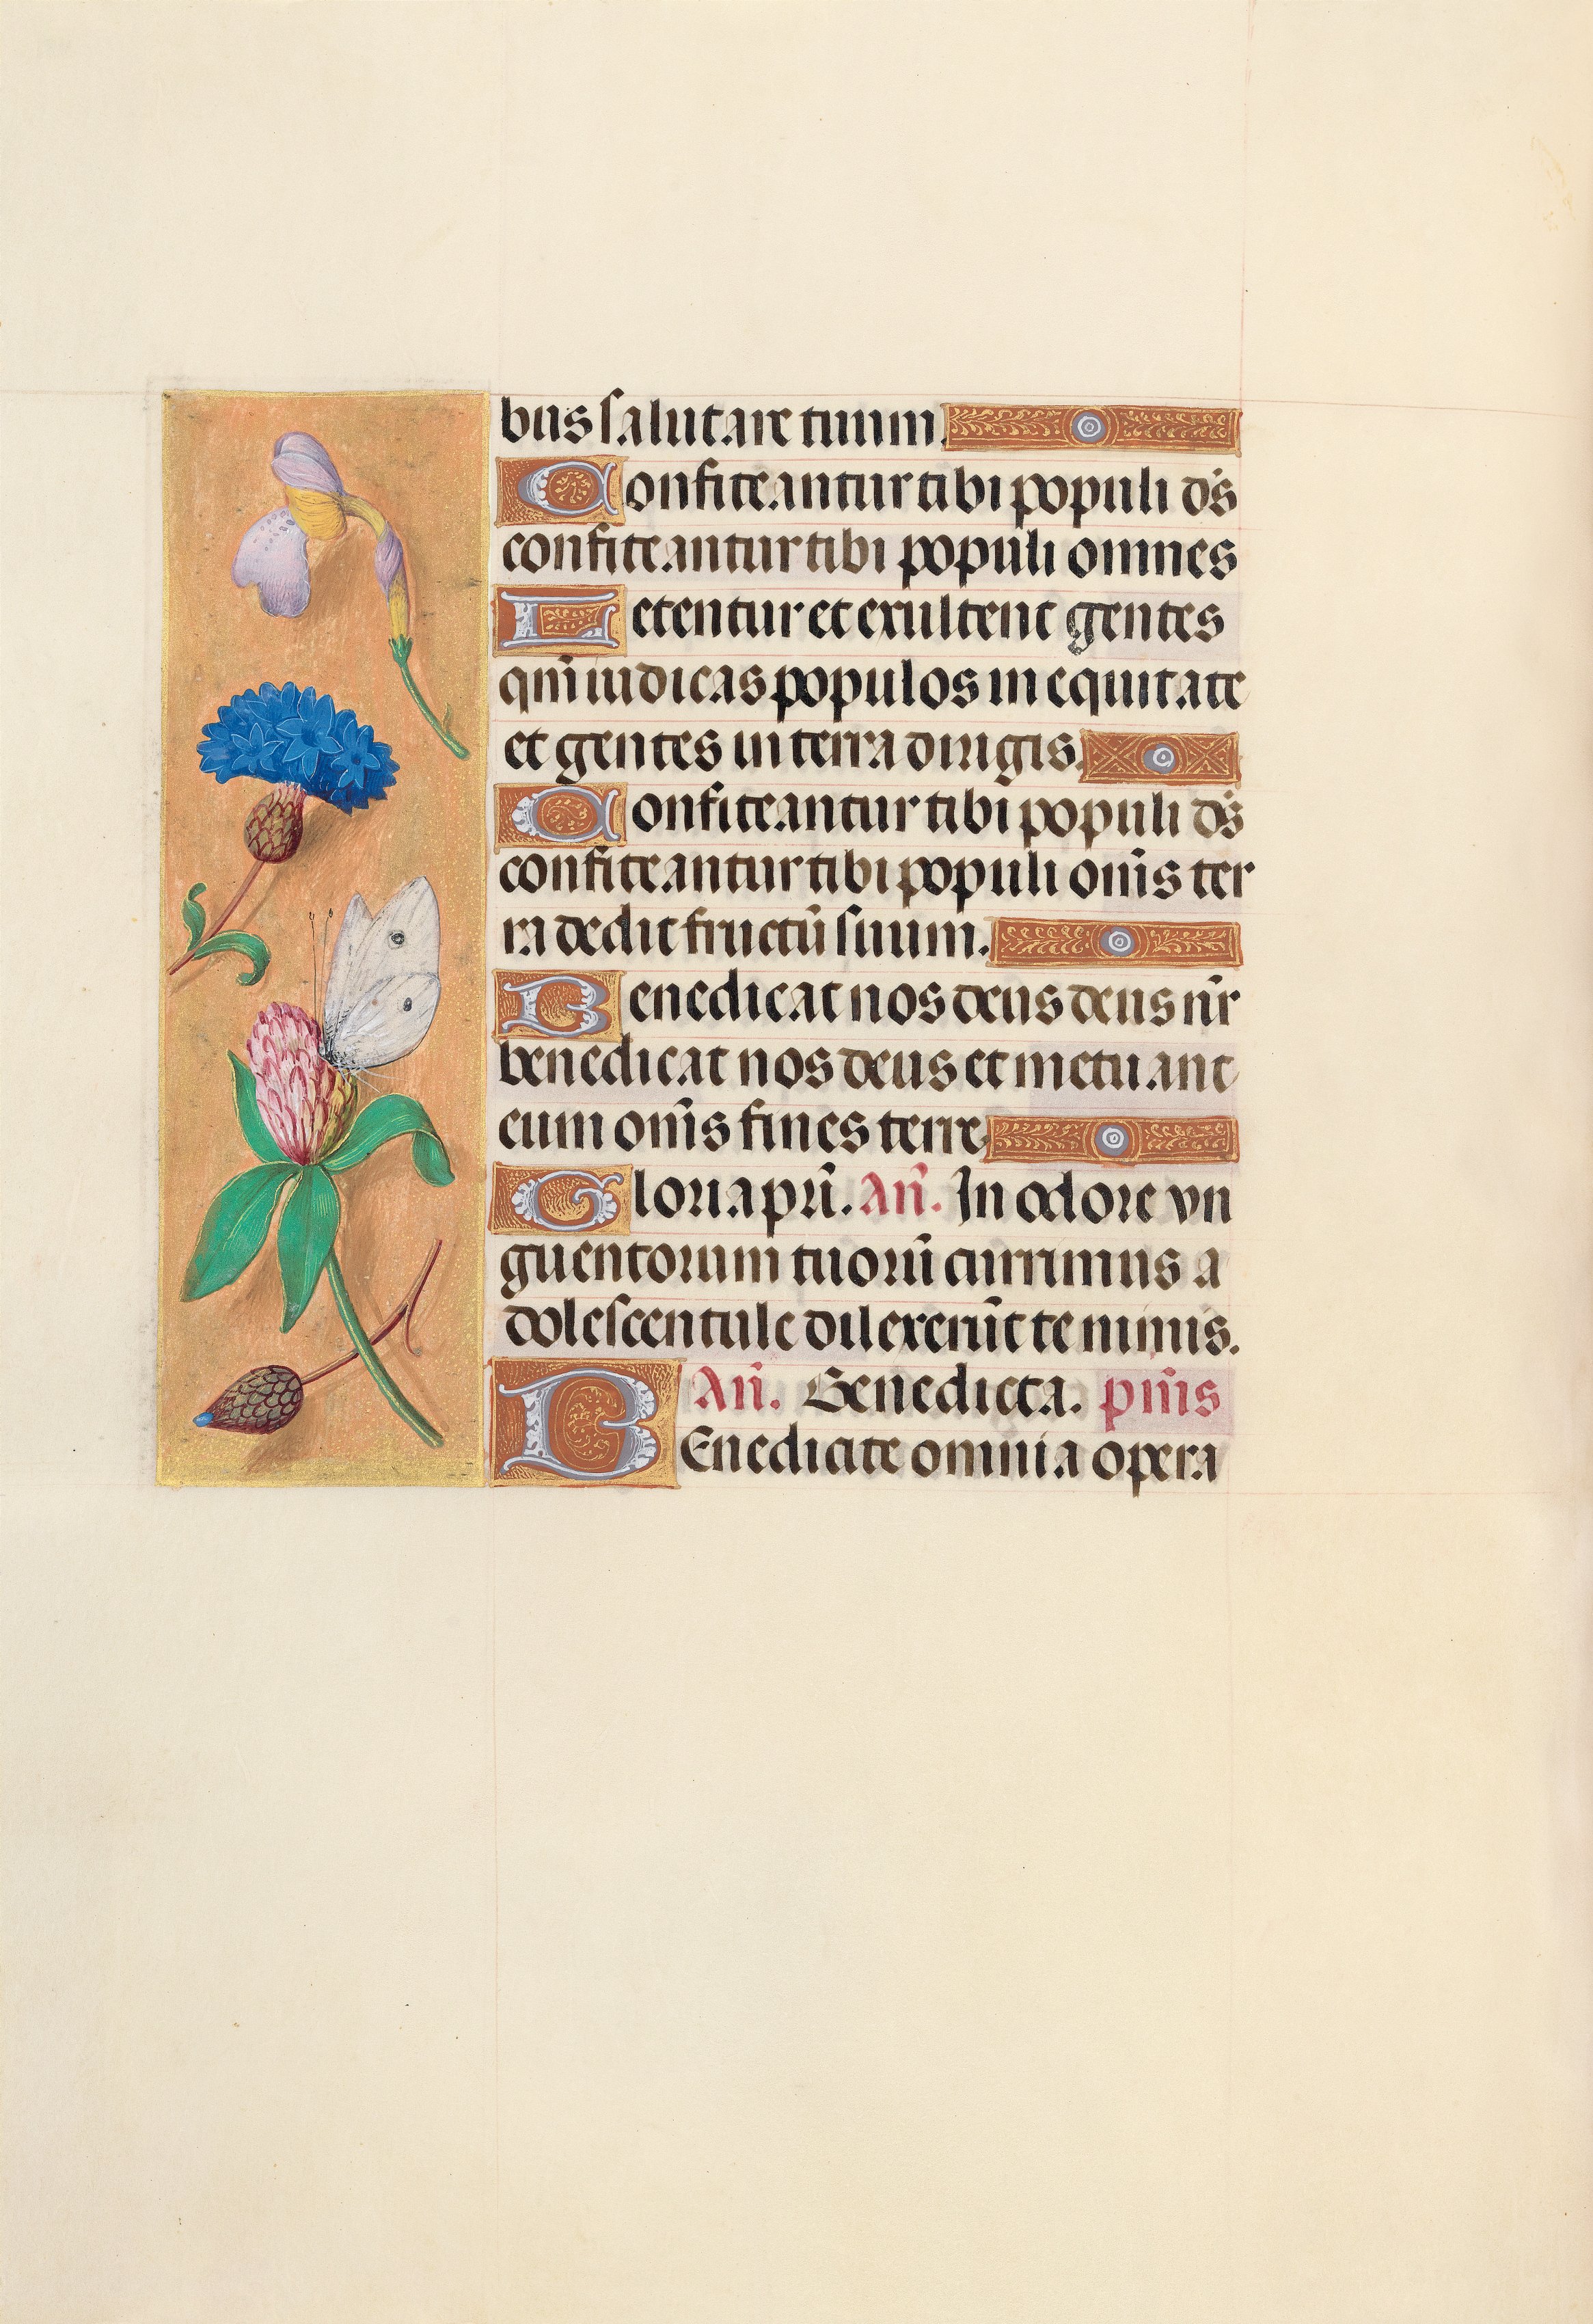 Hours of Queen Isabella the Catholic, Queen of Spain:  Fol. 118v